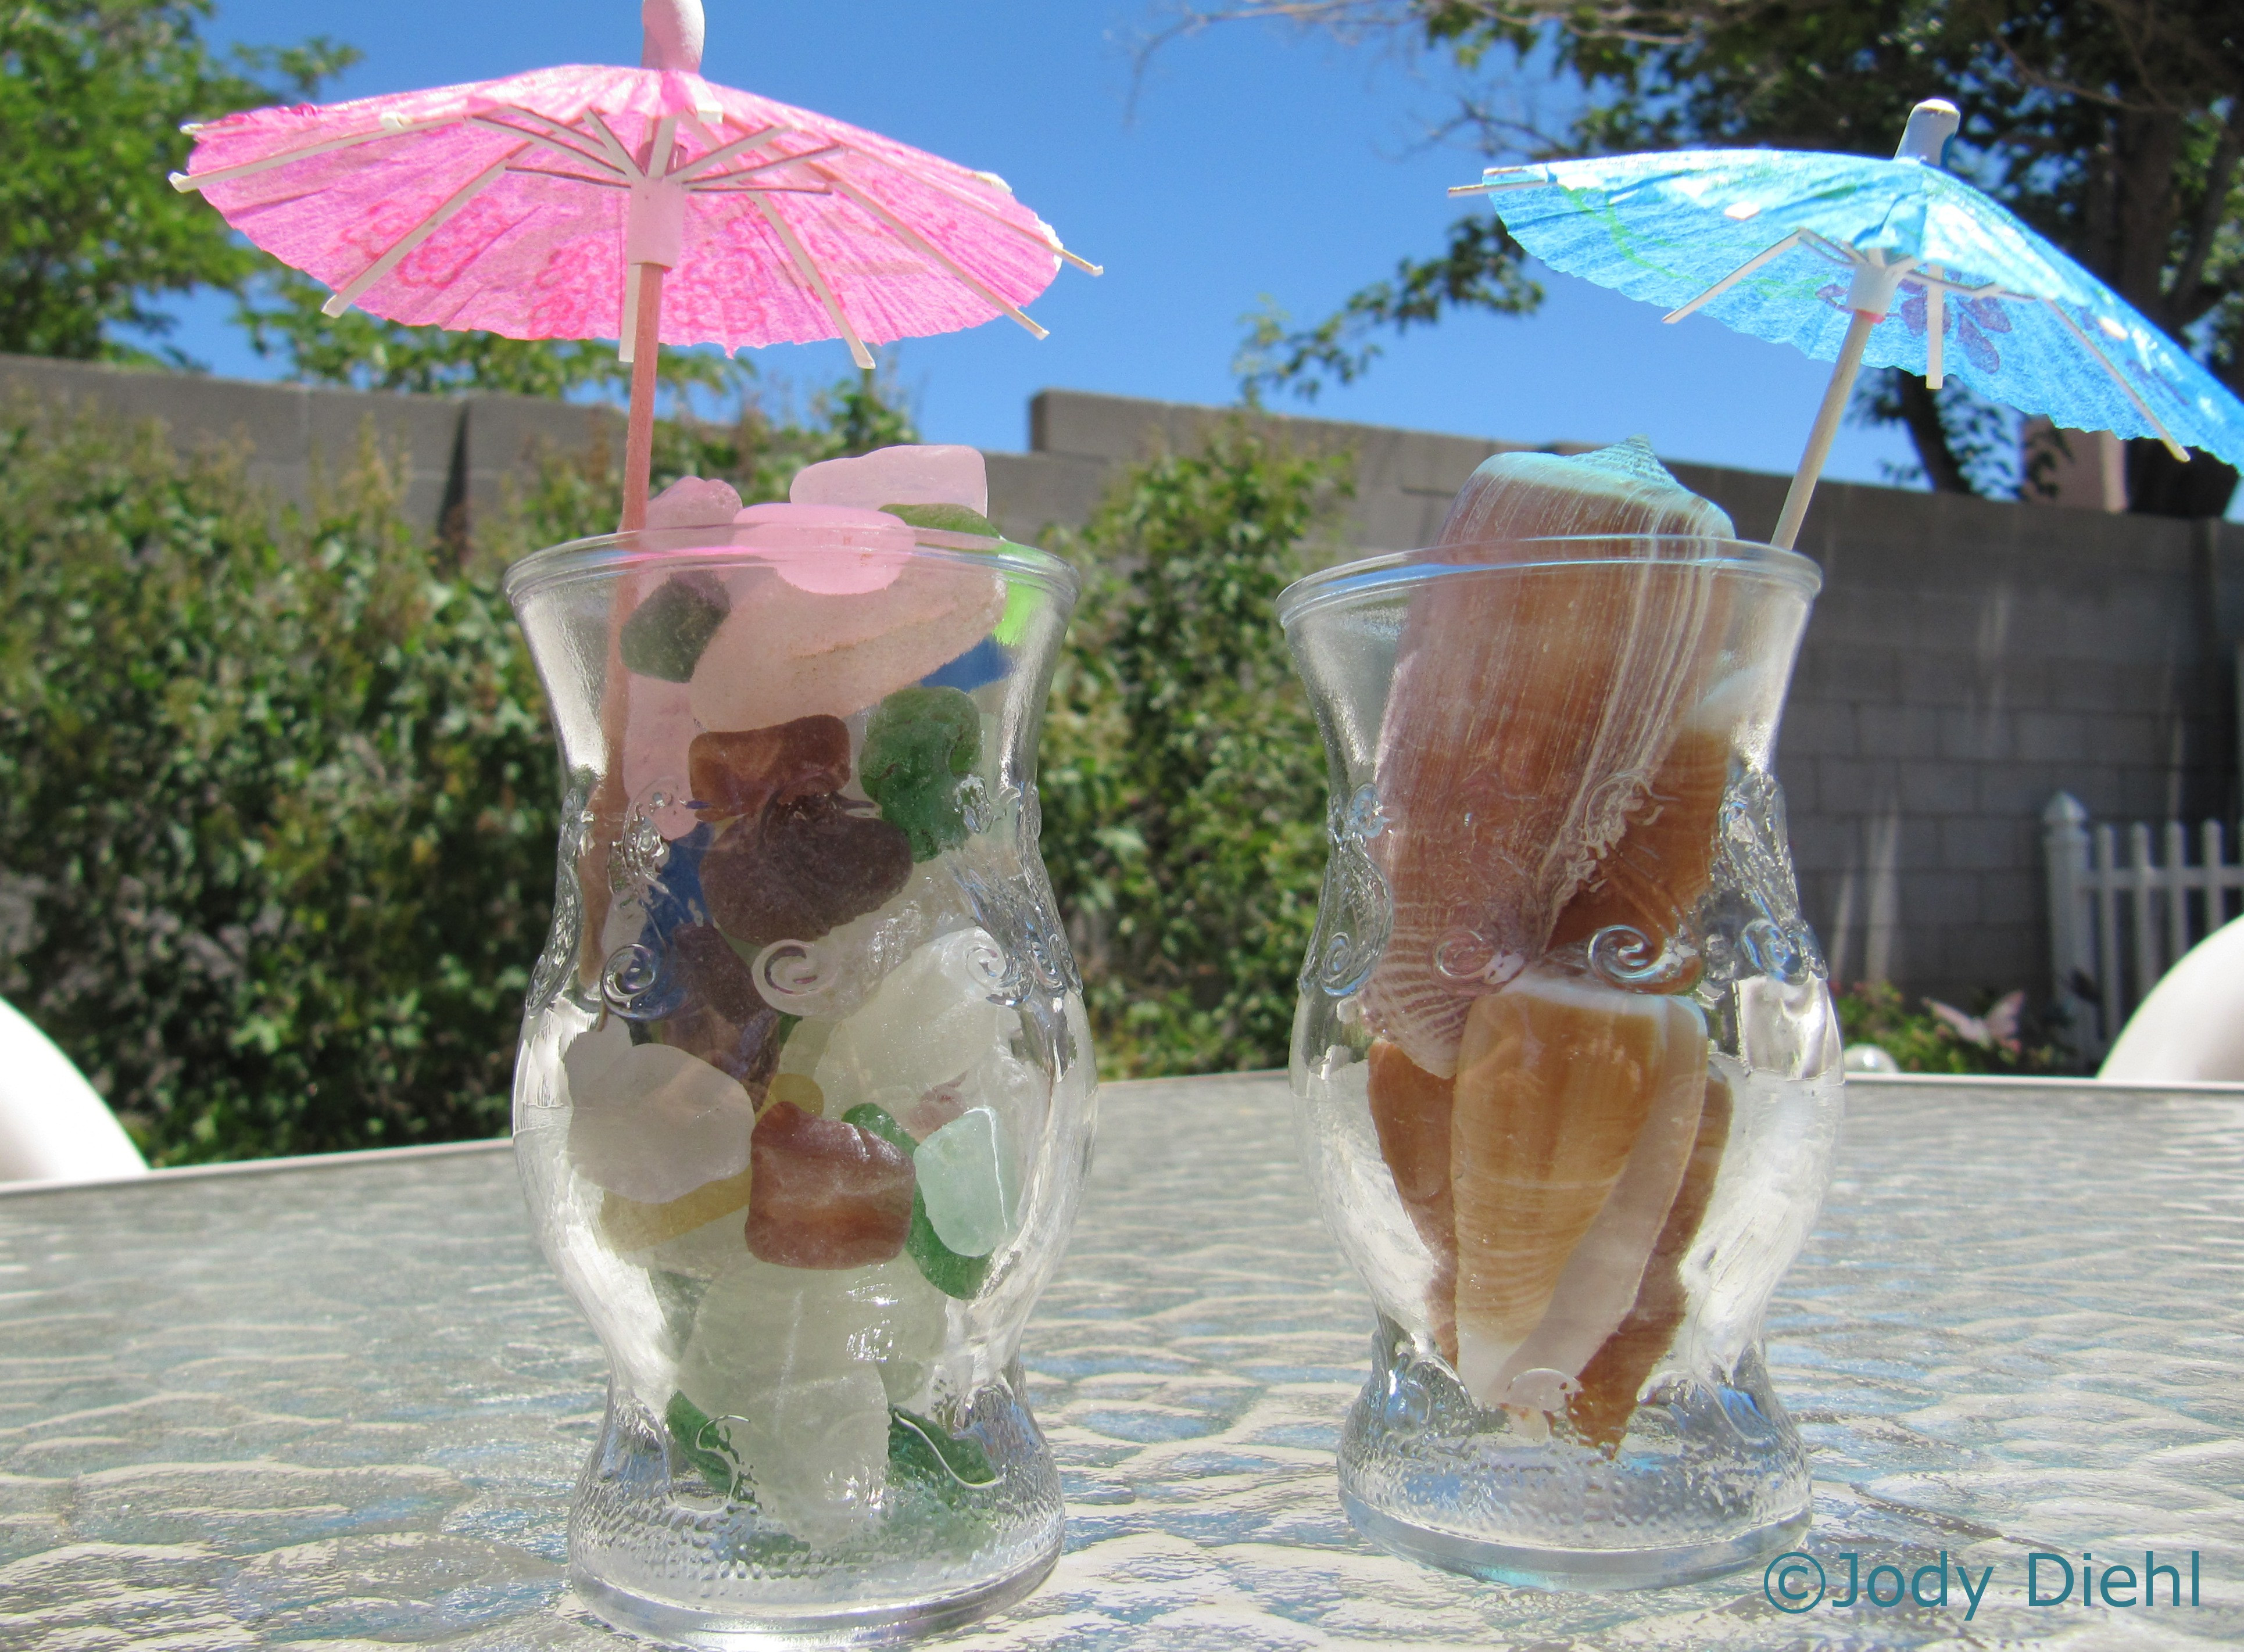 Beach Theme Party Decorating Ideas
 Quick and Easy Summer Party Decoration Beach Treasures